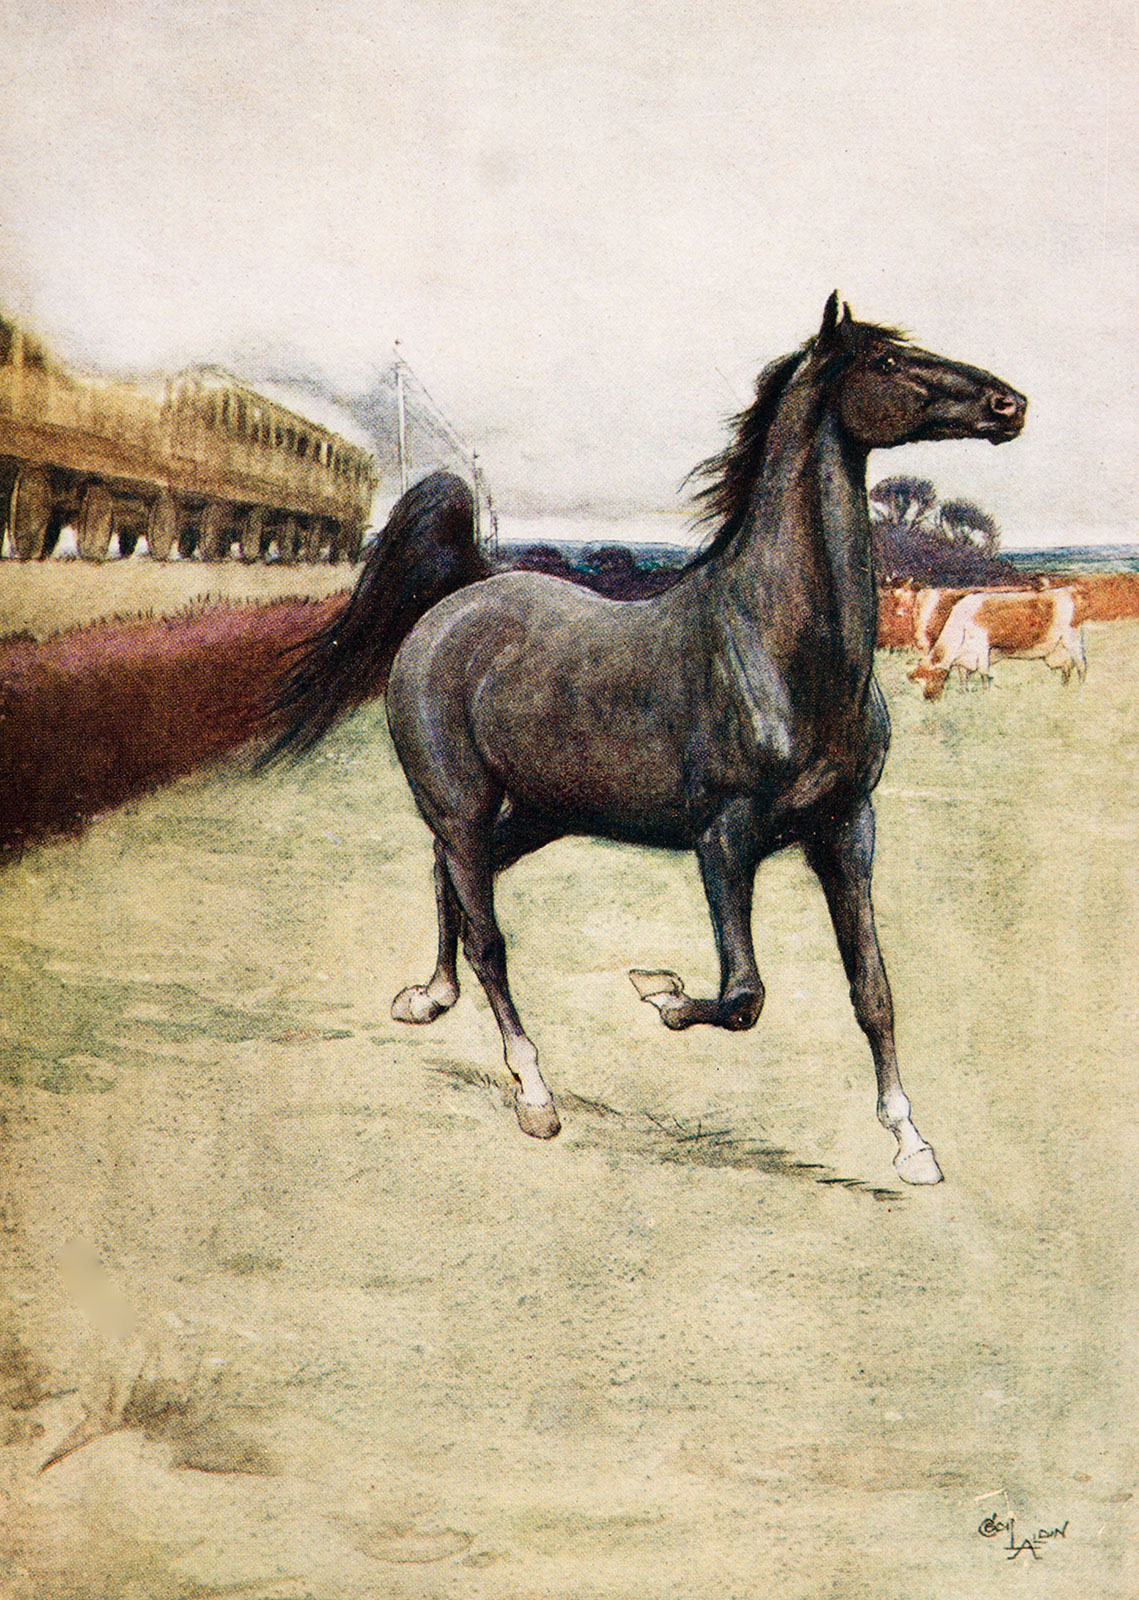 An illustration of Black Beauty from the 1916 edition of the novel (Image retrieved from Visual Arts/Alamy).